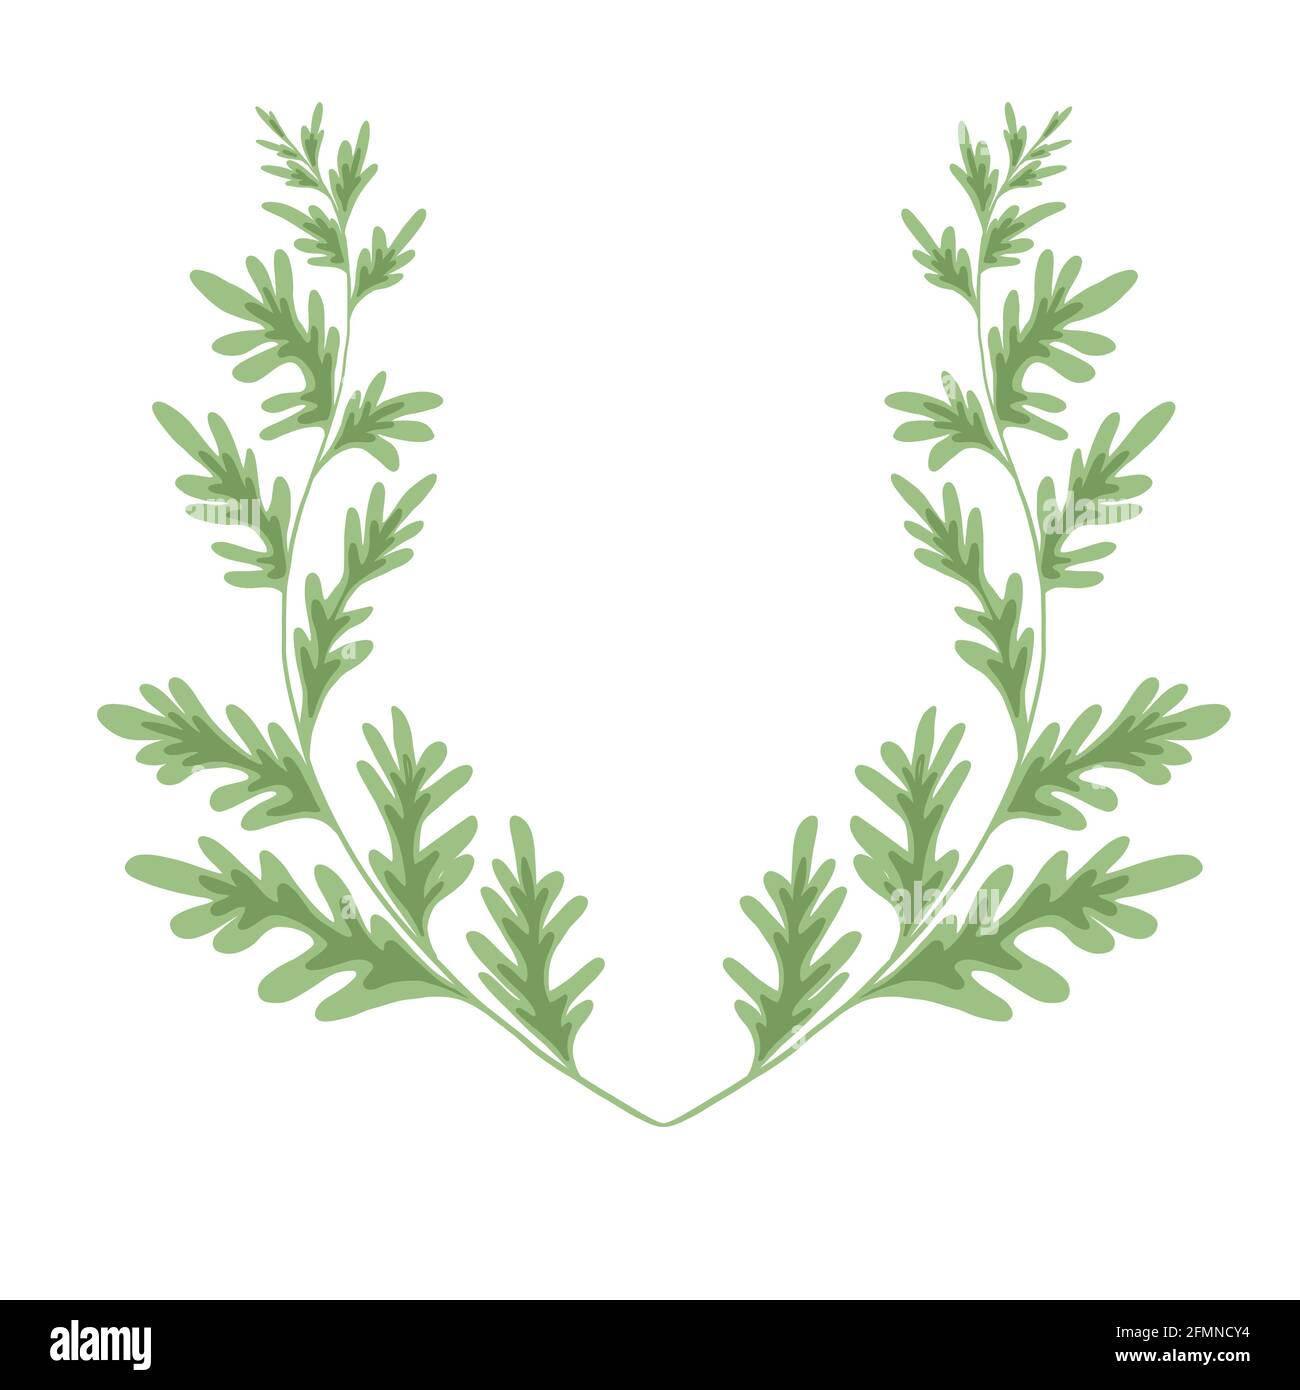 Wormwood herbaceous frame on a white background. Template with grass fields. Wreath with a branches of sagebrush. Vector natural card with Artemisia a Stock Vector